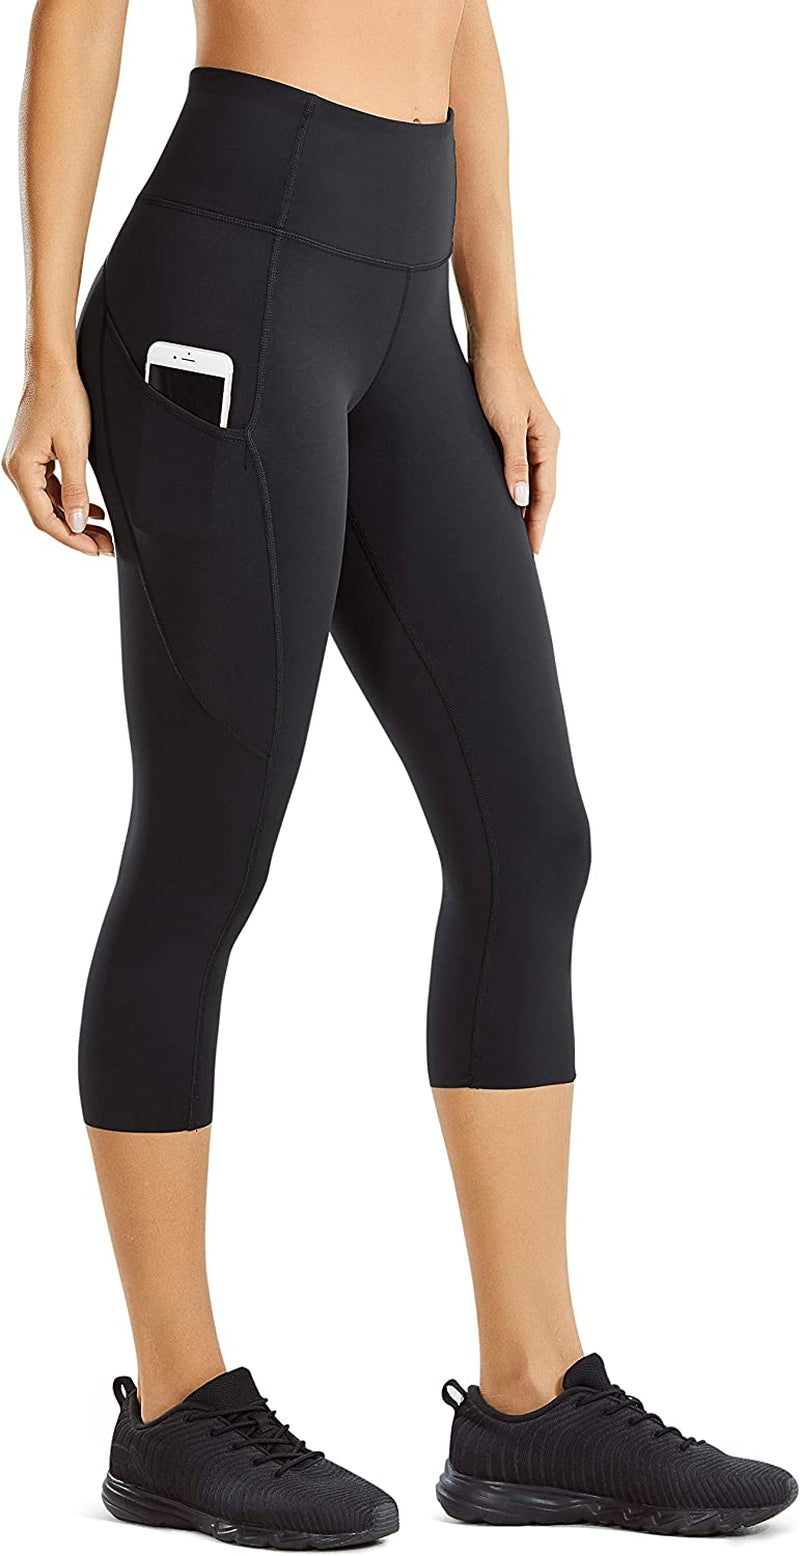 "Premium Gym Leggings for Women - Enhanced Comfort Workout Leggings with Pockets and High Waist"